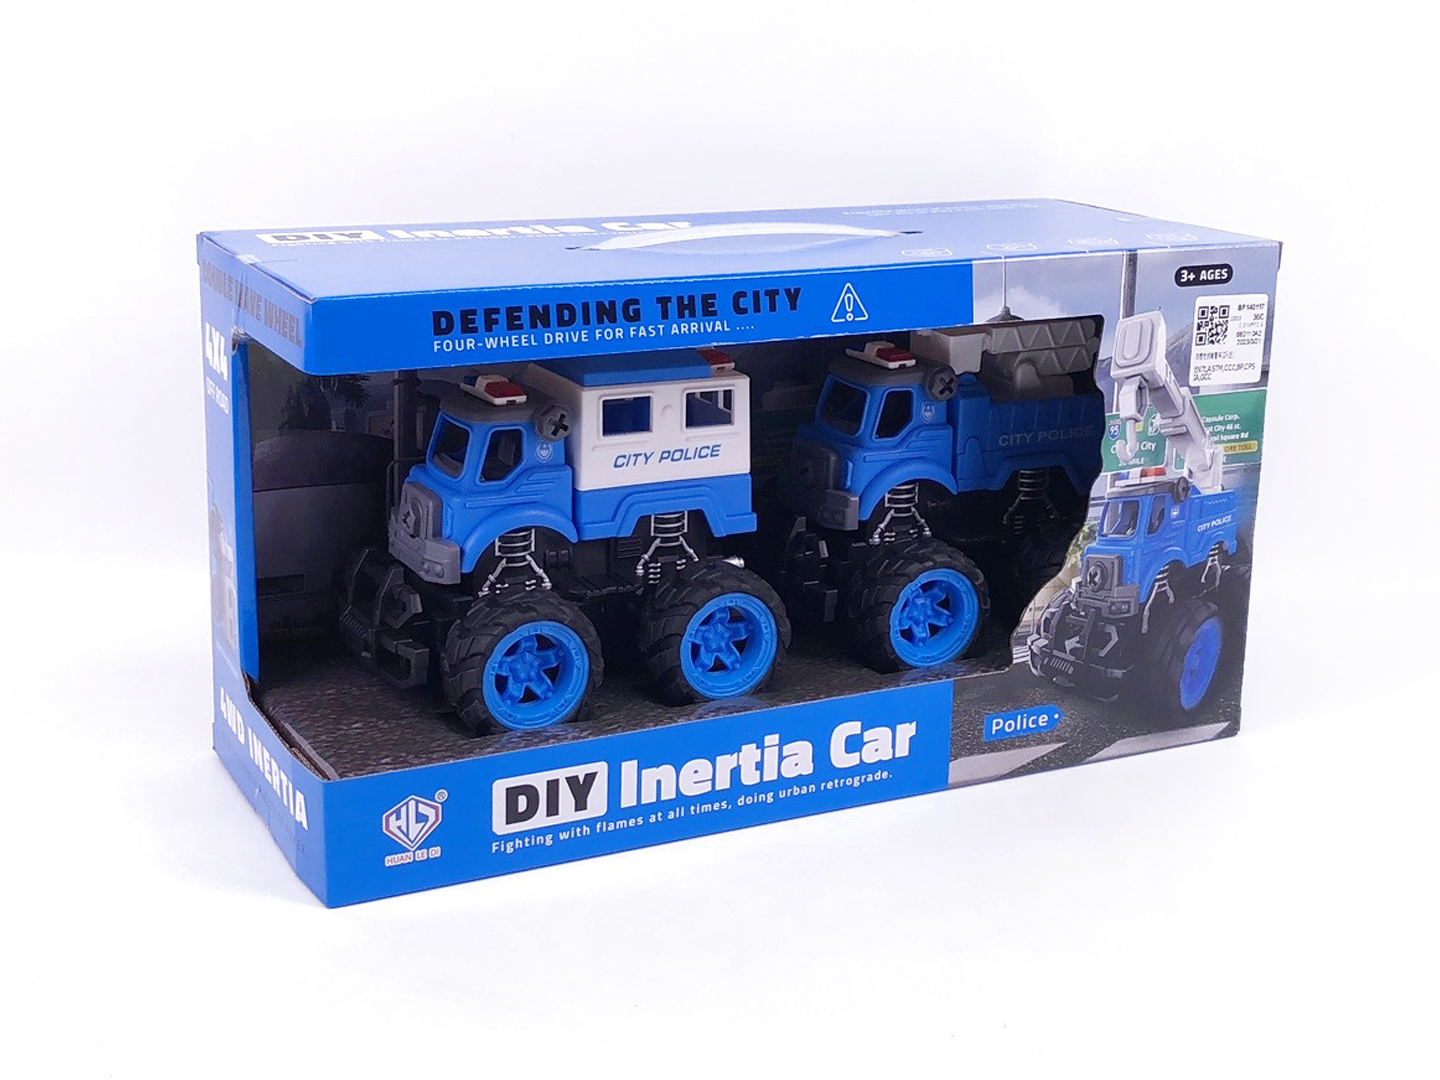 Friction Diy Police Car(2in1) toys